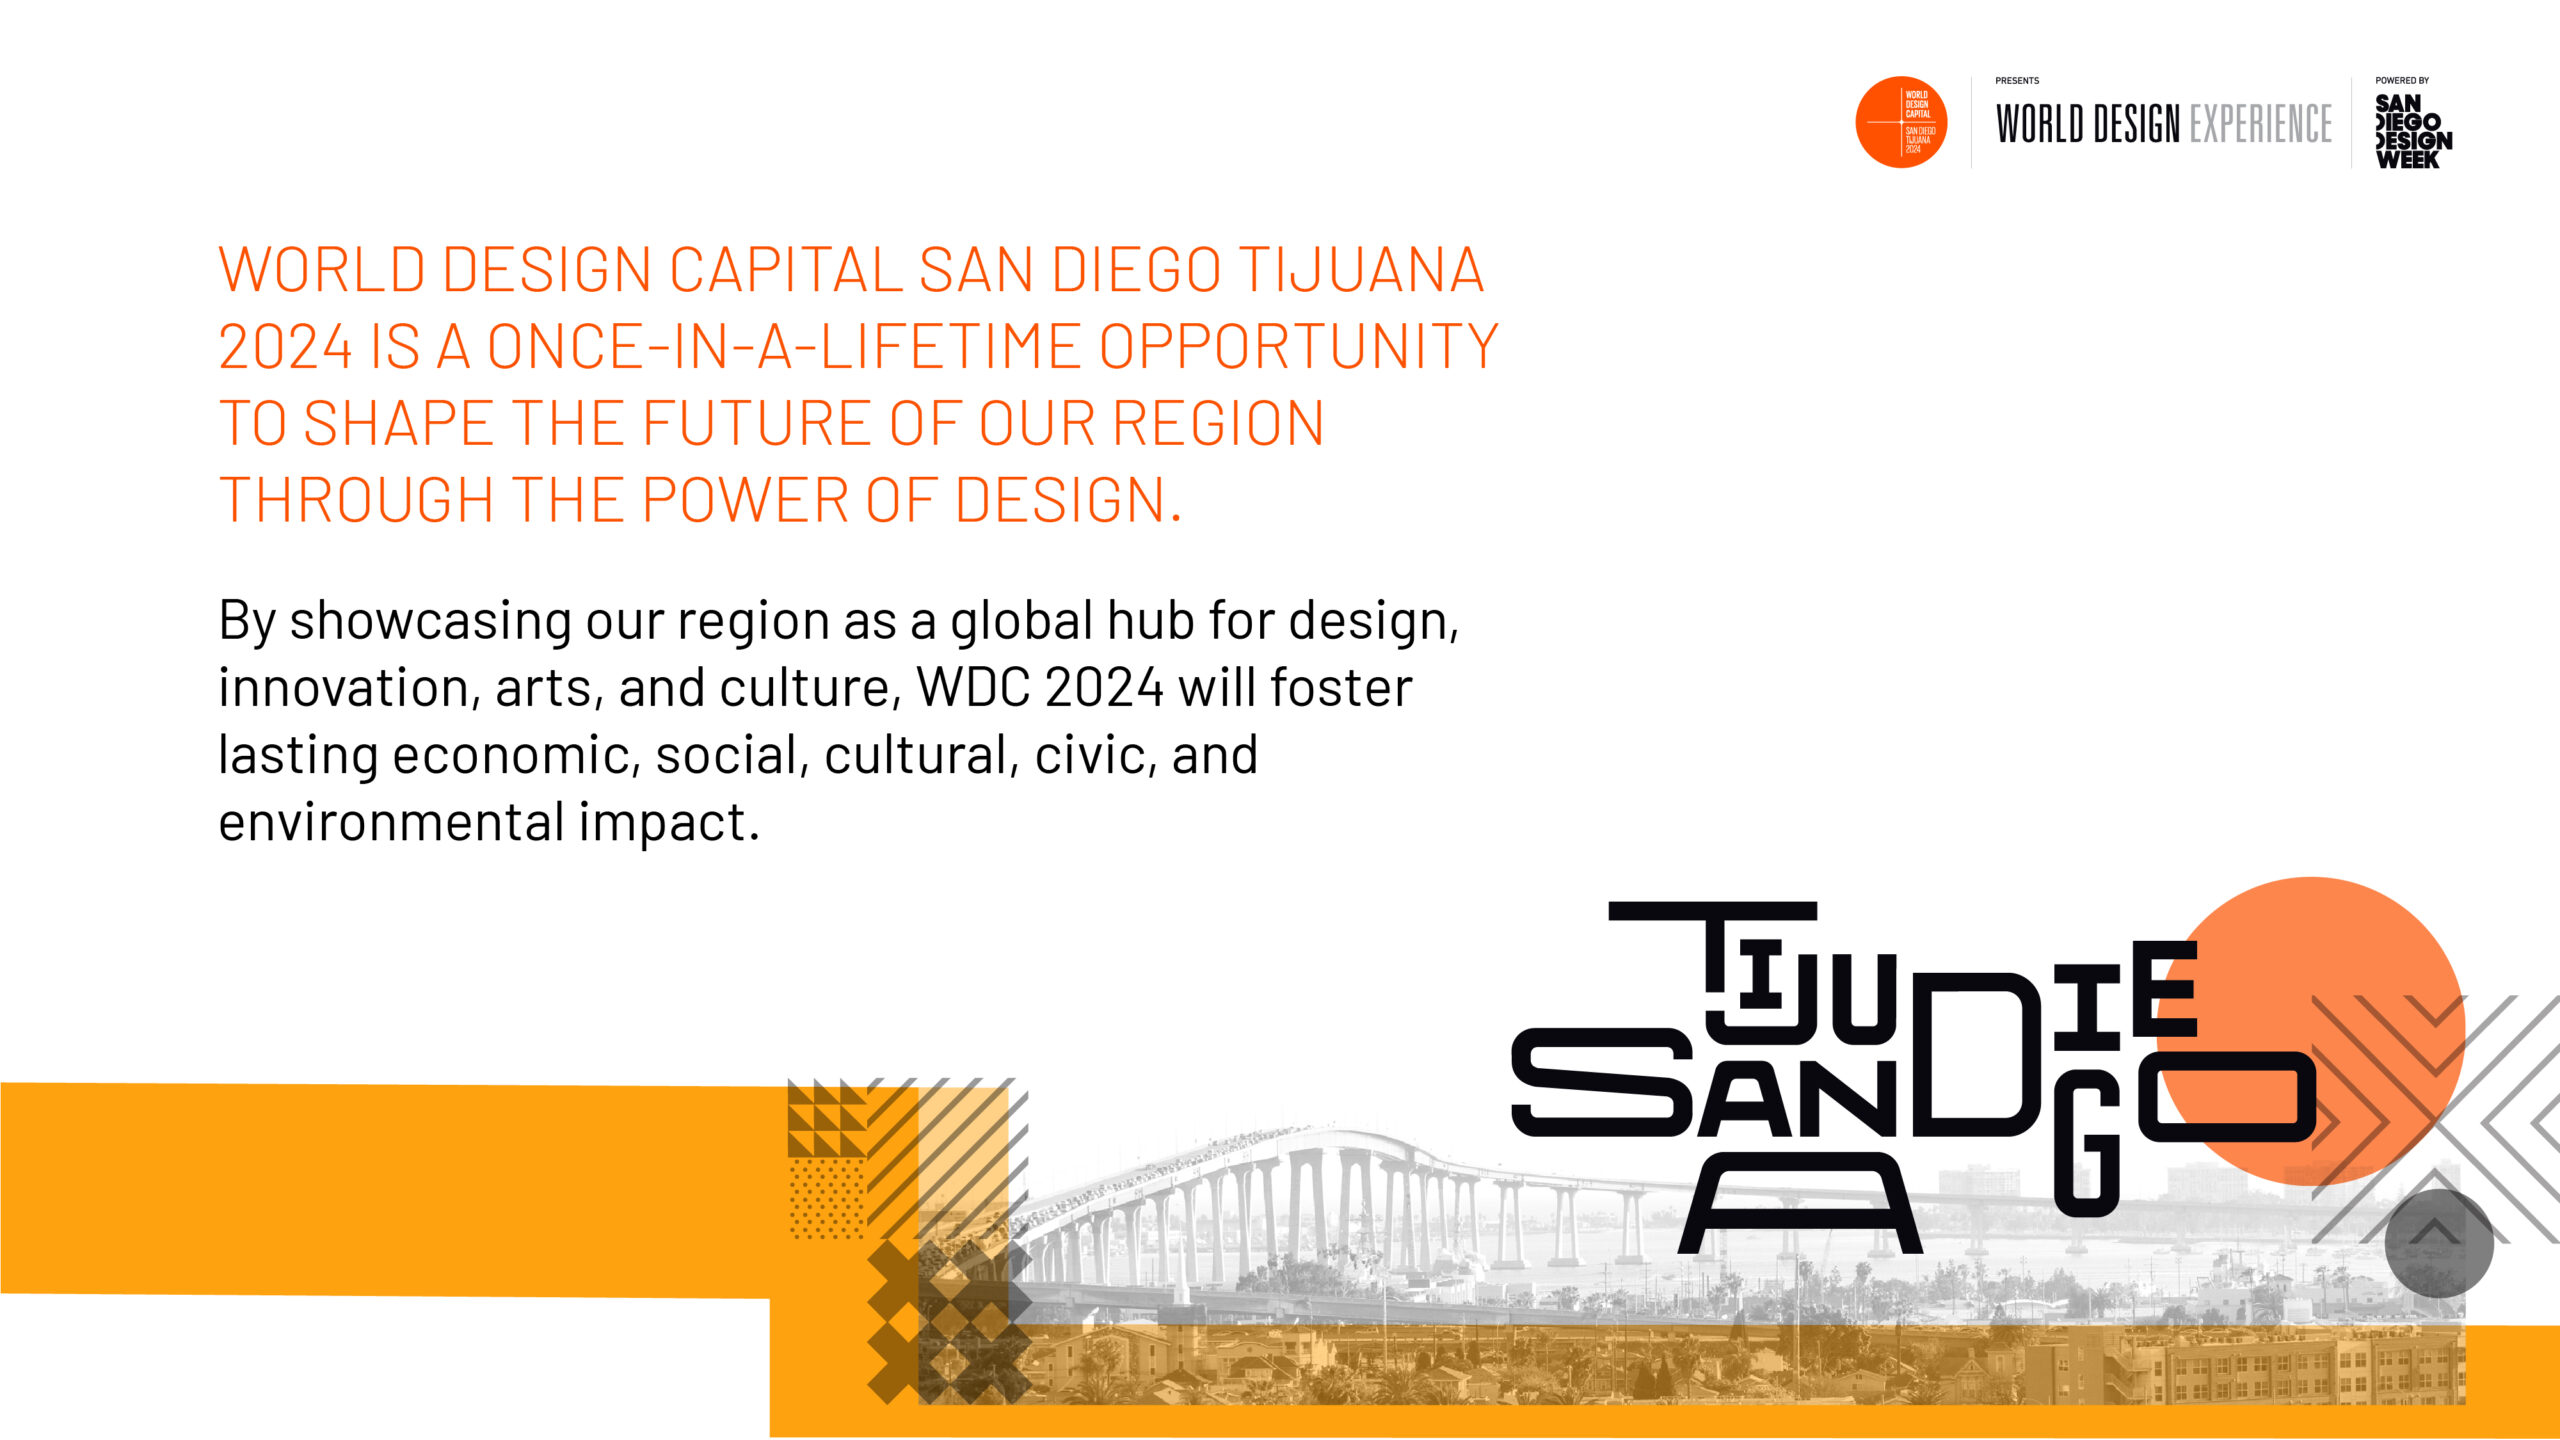 World Design Capital San Diego Tijuana 2024 is a once-in-a-lifetime opportunity to shape the future of our region through the power of design.